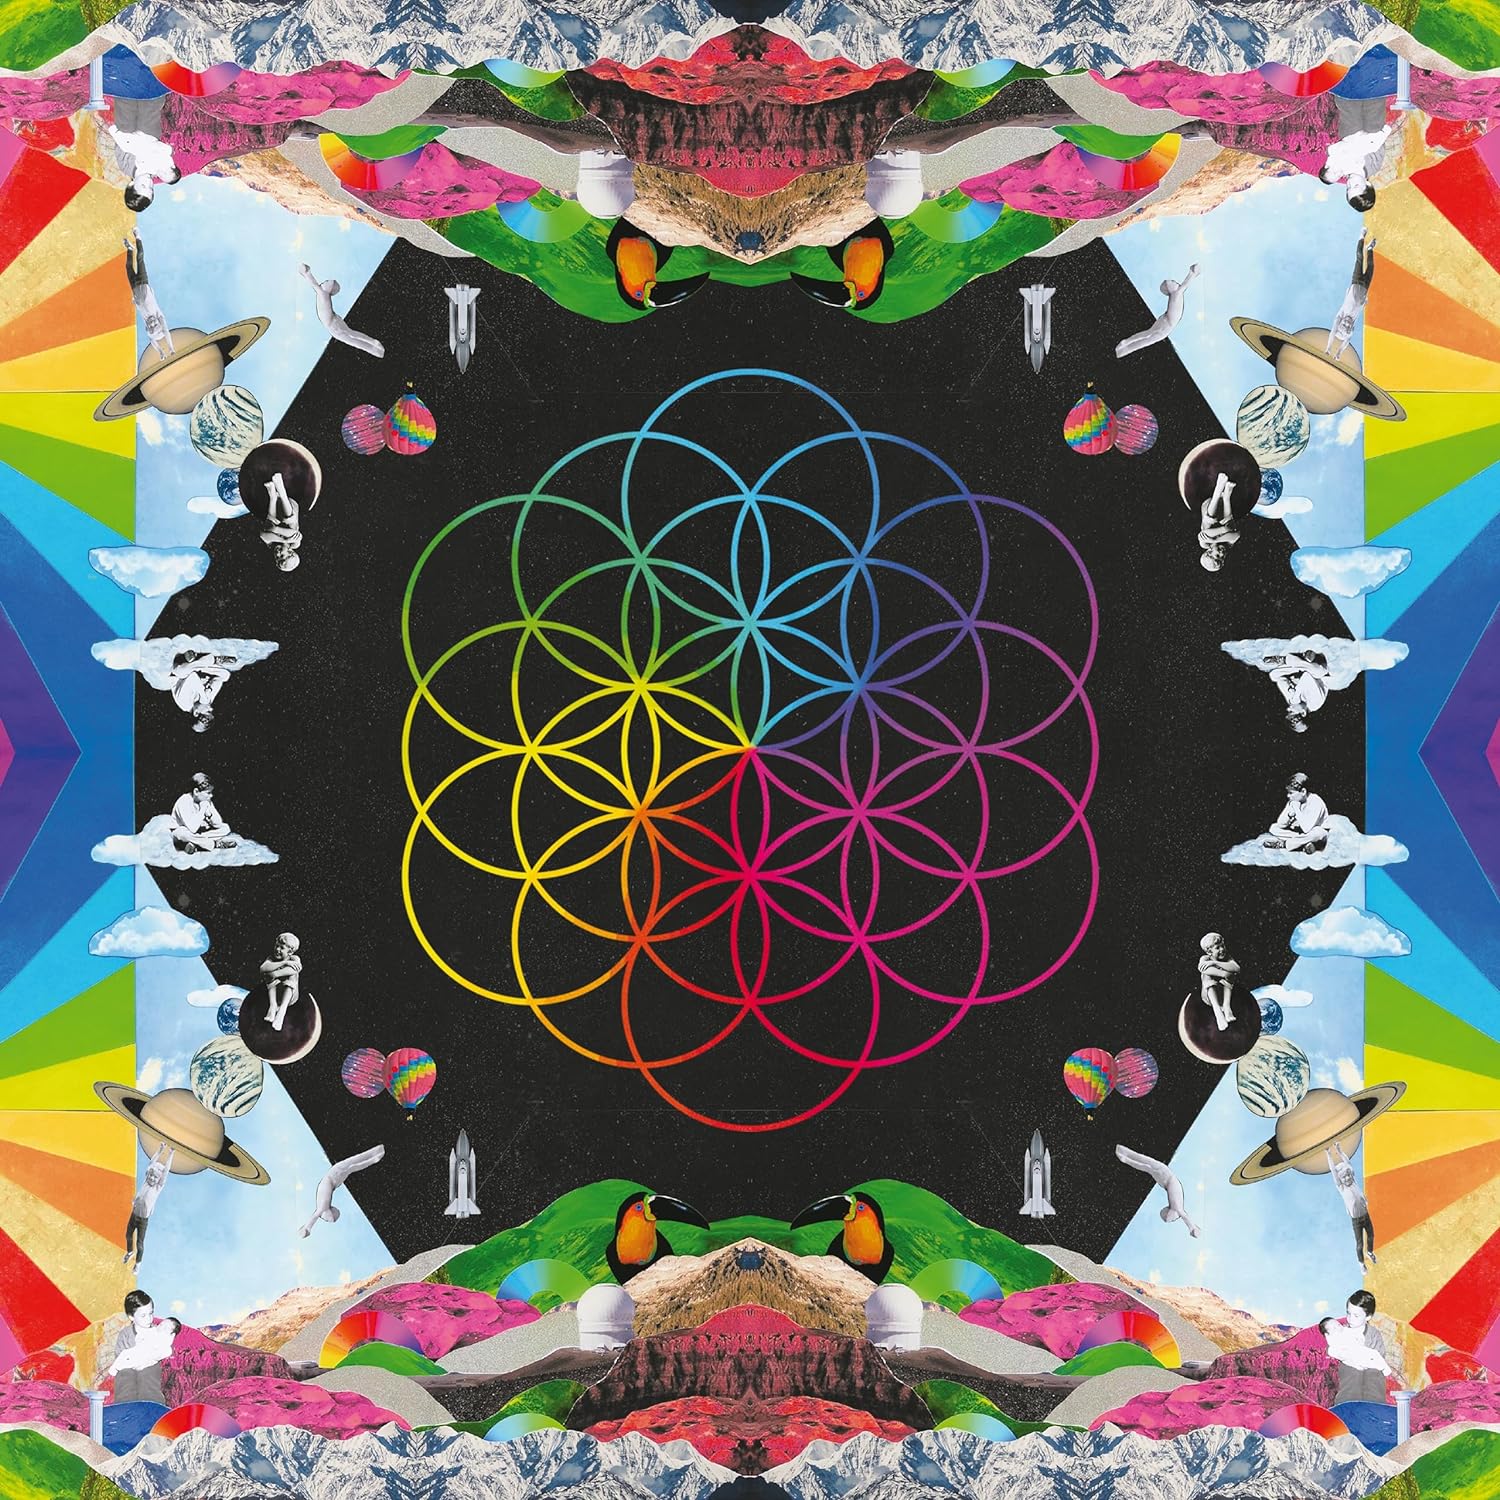 A Head Full of Dreams (ATL 75) Limited Recycled Vinyl LP